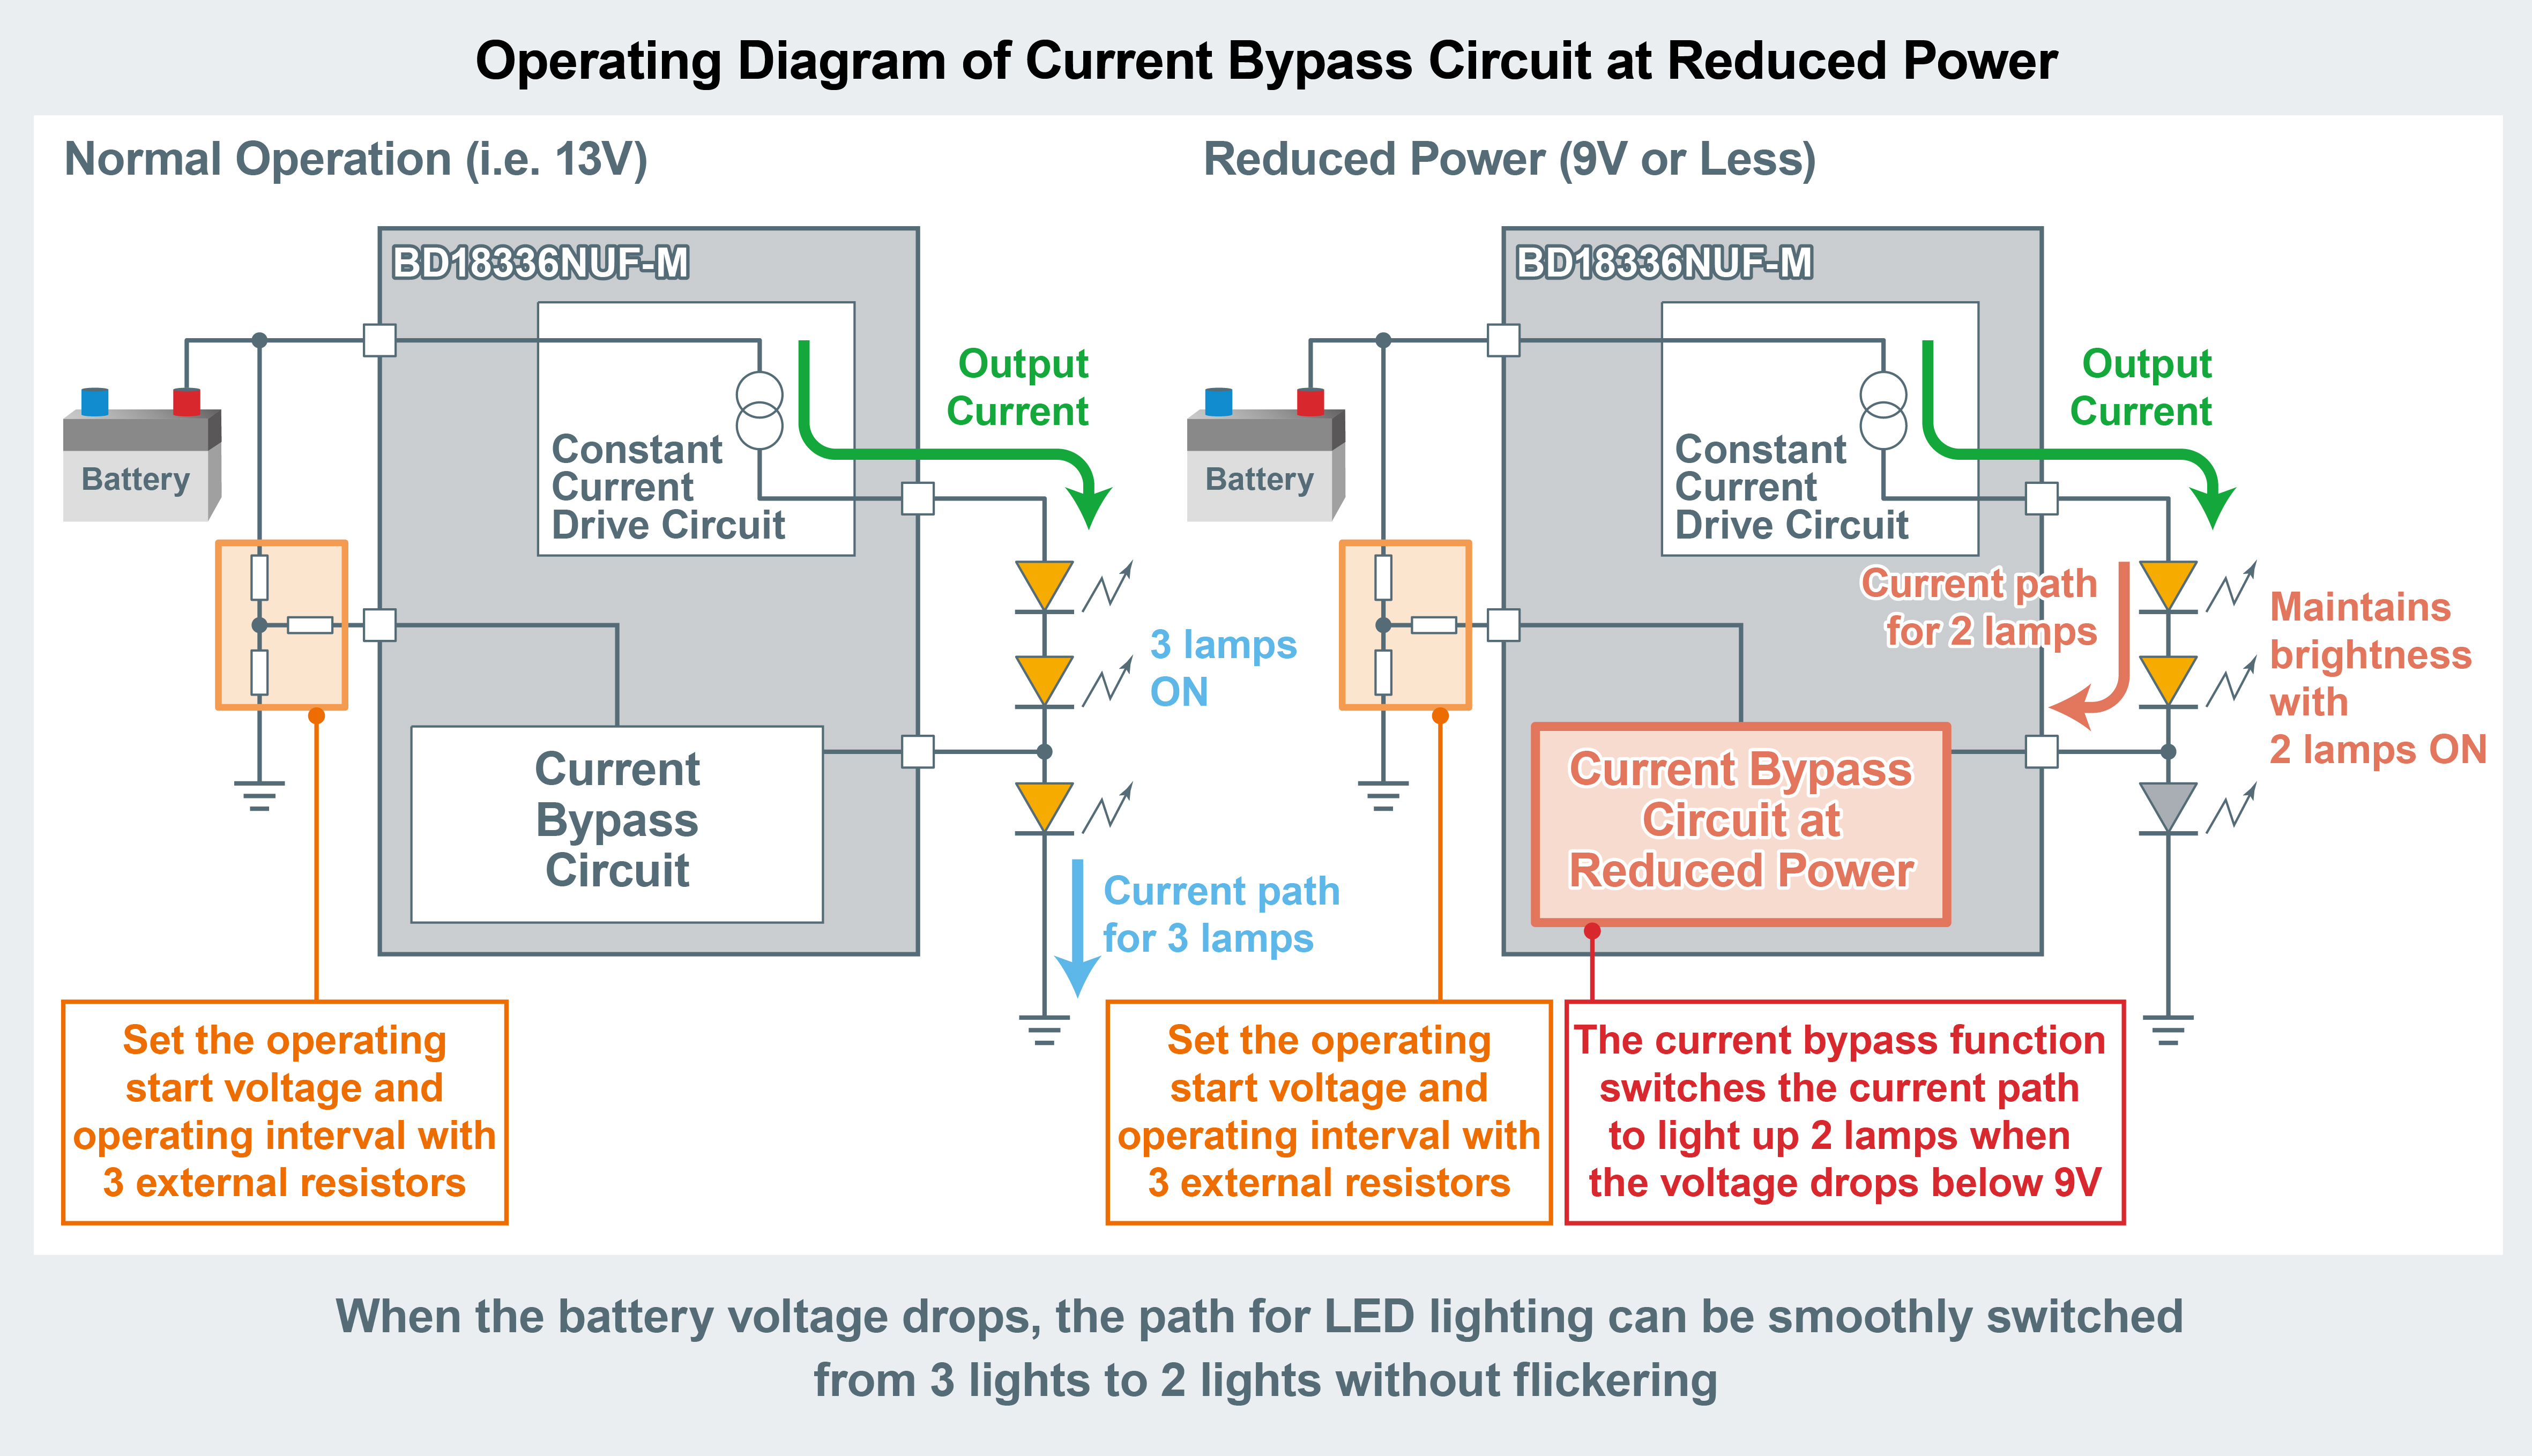 LED Driver for Stable Lighting During Battery Voltage Drops